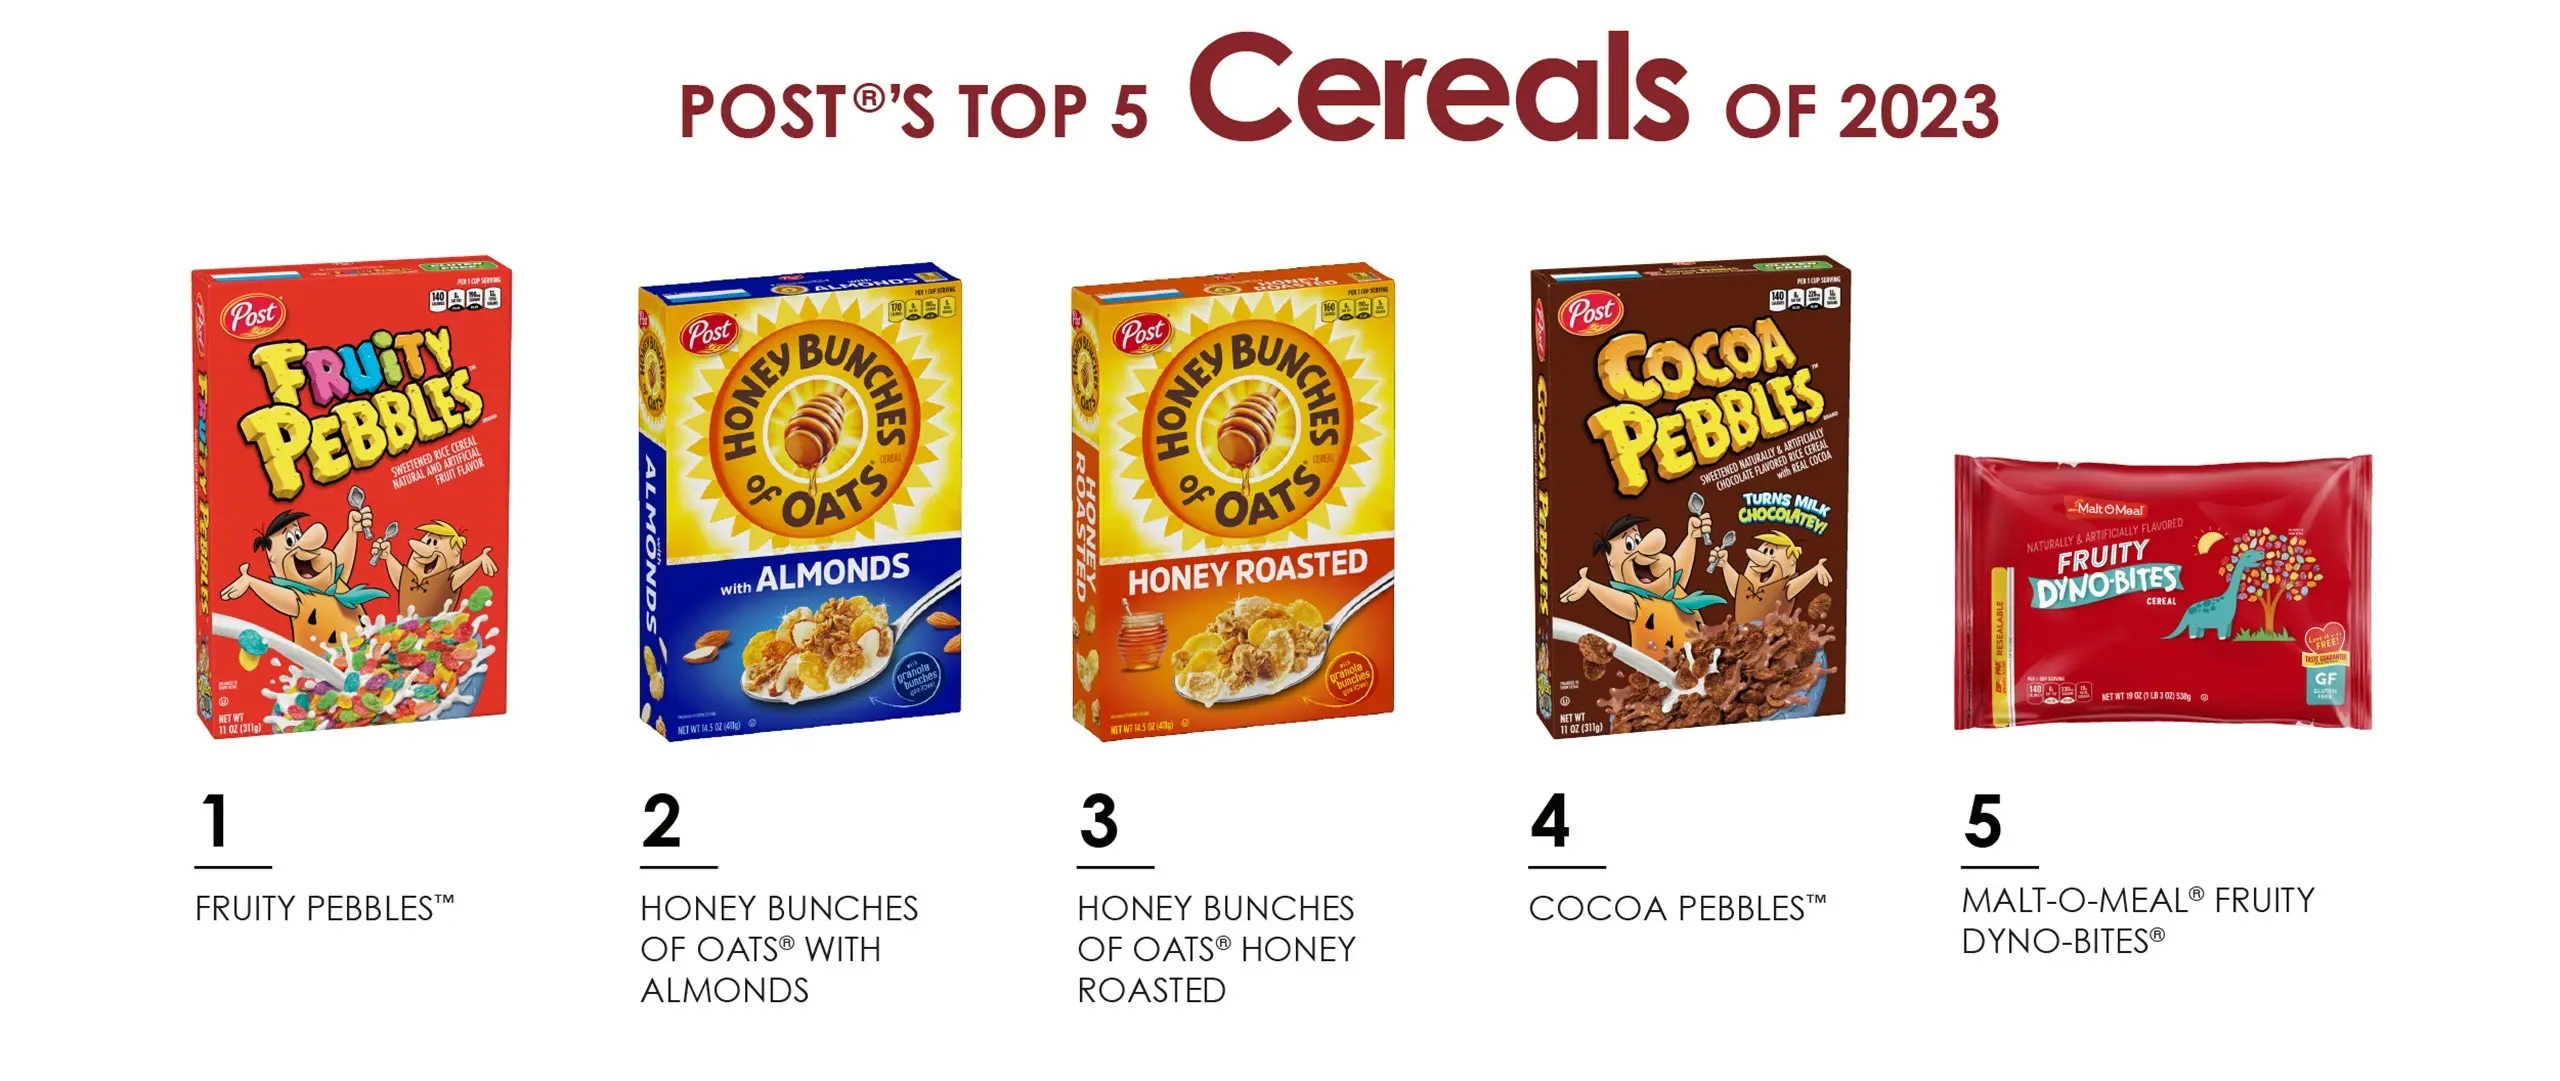 Post's Top 5 Cereals of 2023: 1. Fruity PEBBLES, 2. Honey Bunches of Oats with Almonds, 3. Honey Bunches of Oats Honey Roasted, 4. Cocoa PEBBLES, 5. Malt-O-Meal Fruity Dyno-Bites